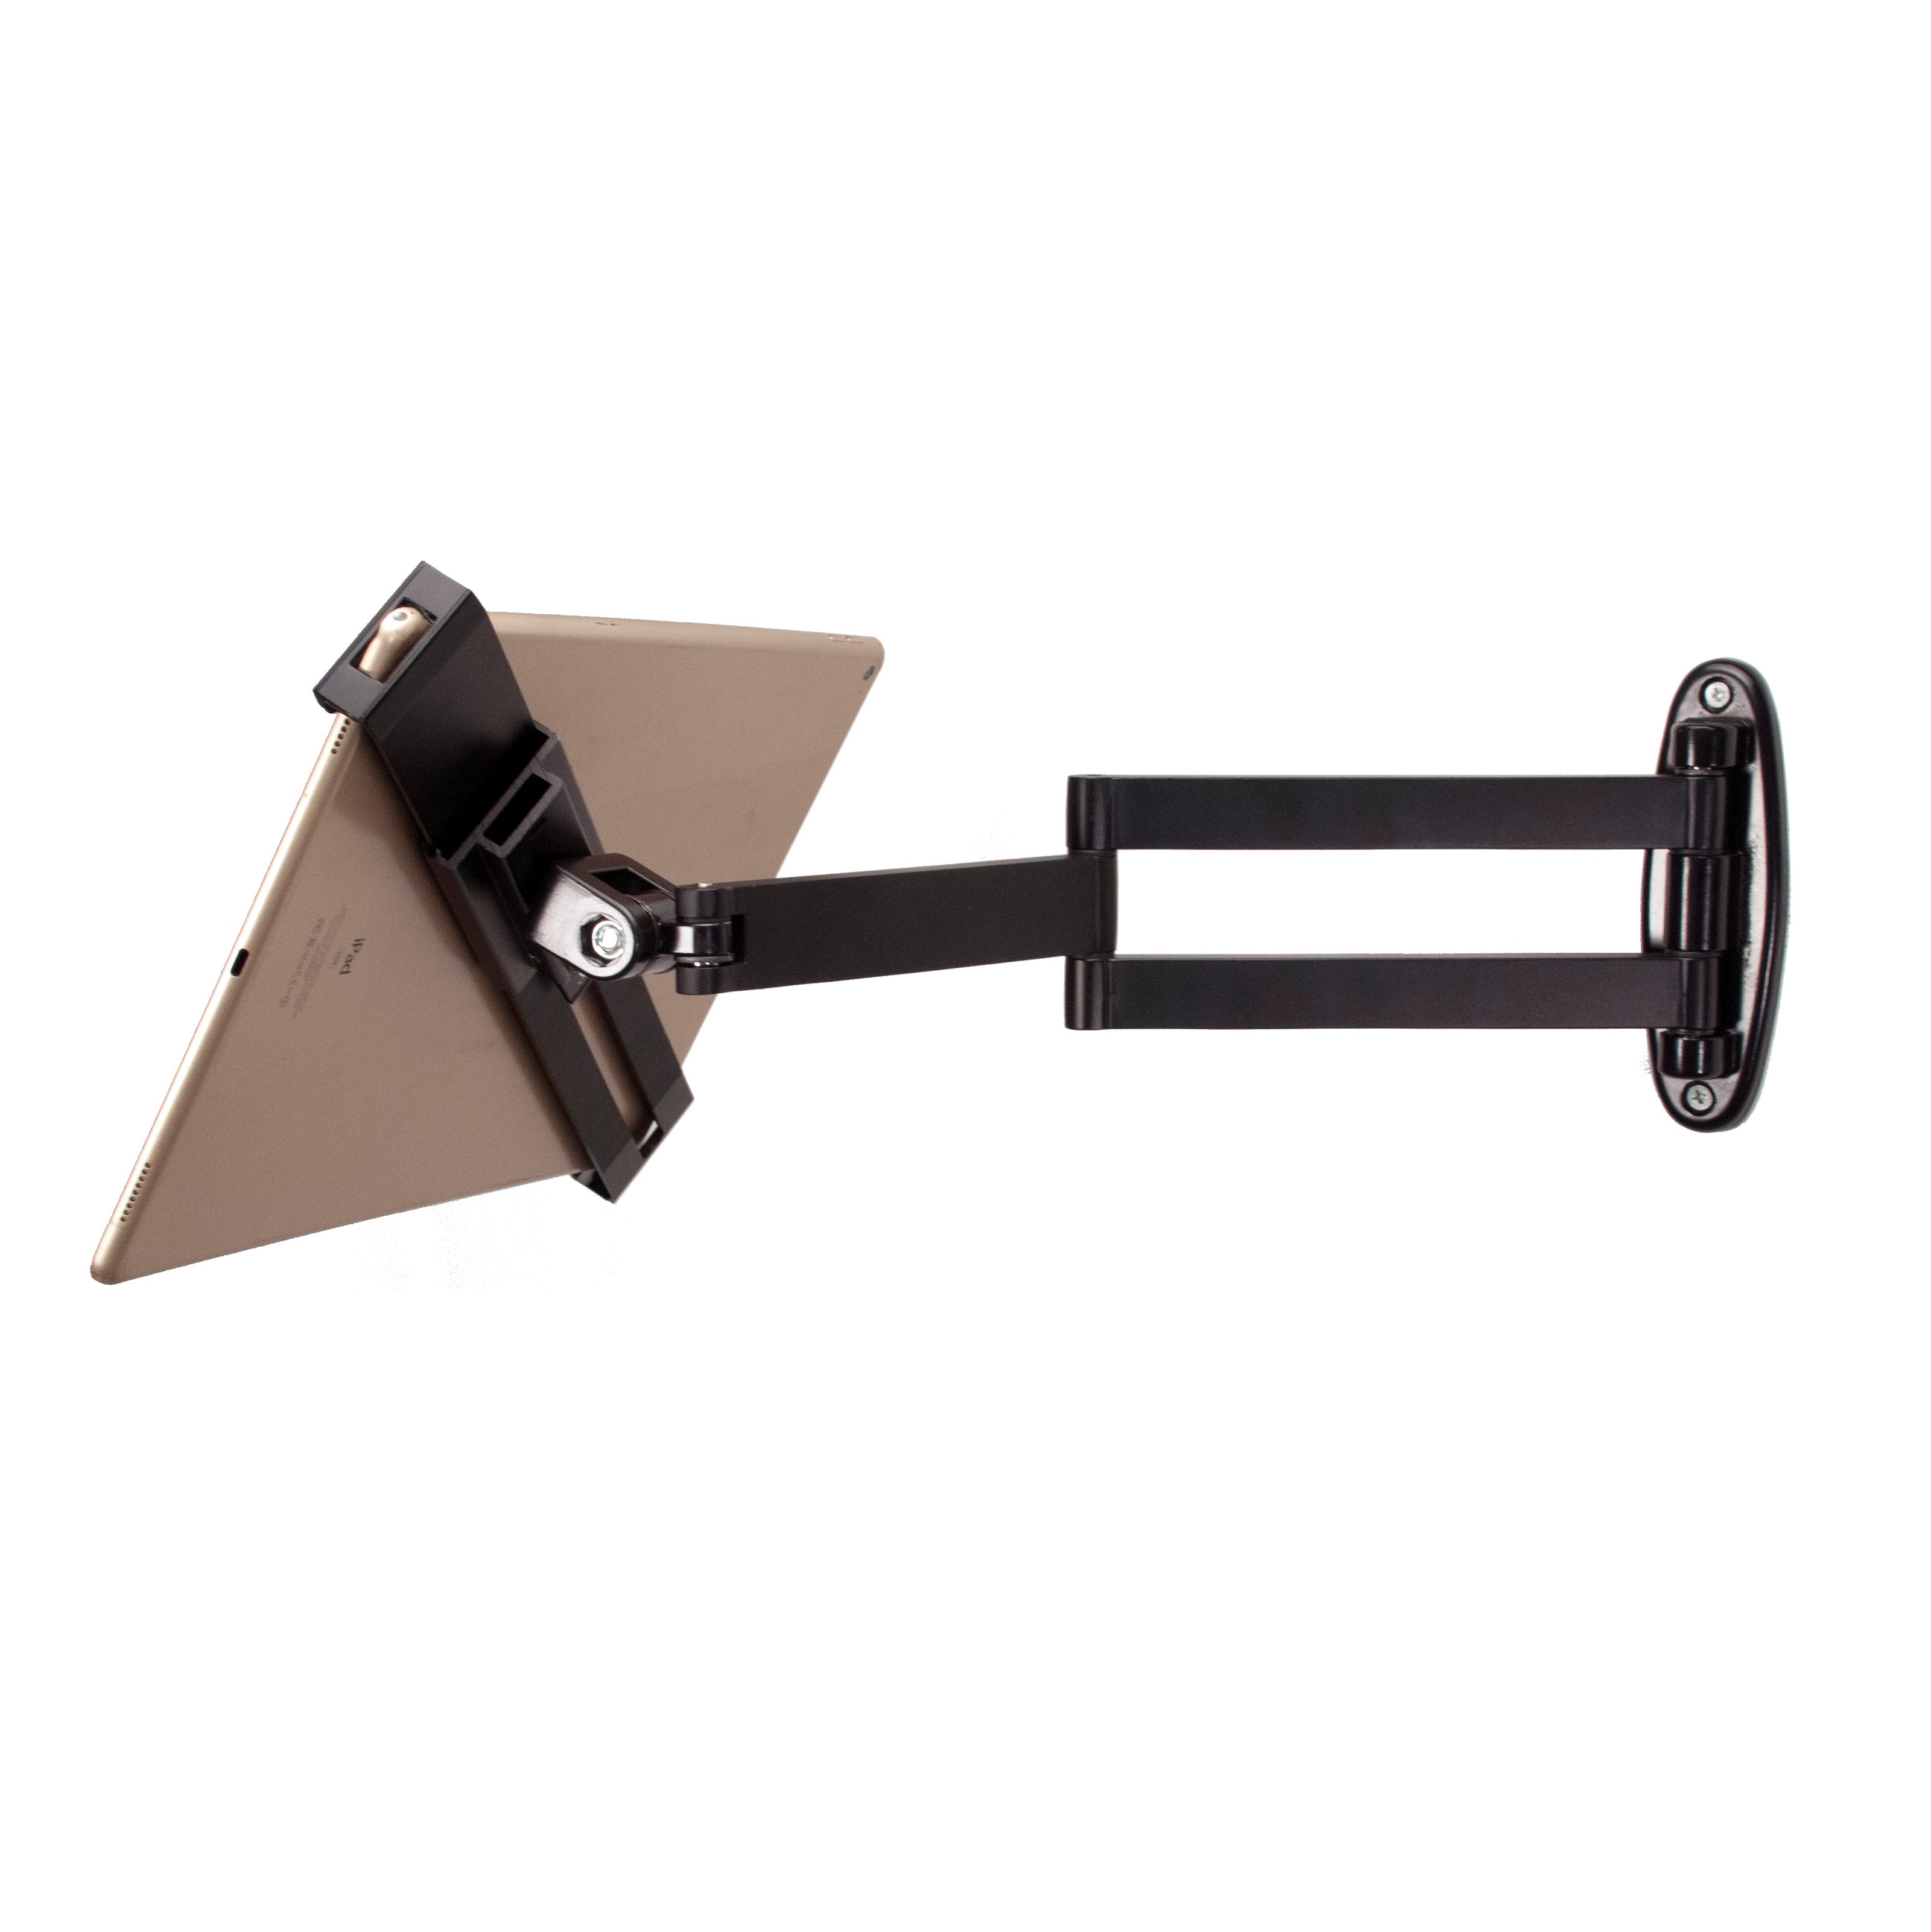 Articulating Security Wall Mount for 7 - 13 Inch Tablets